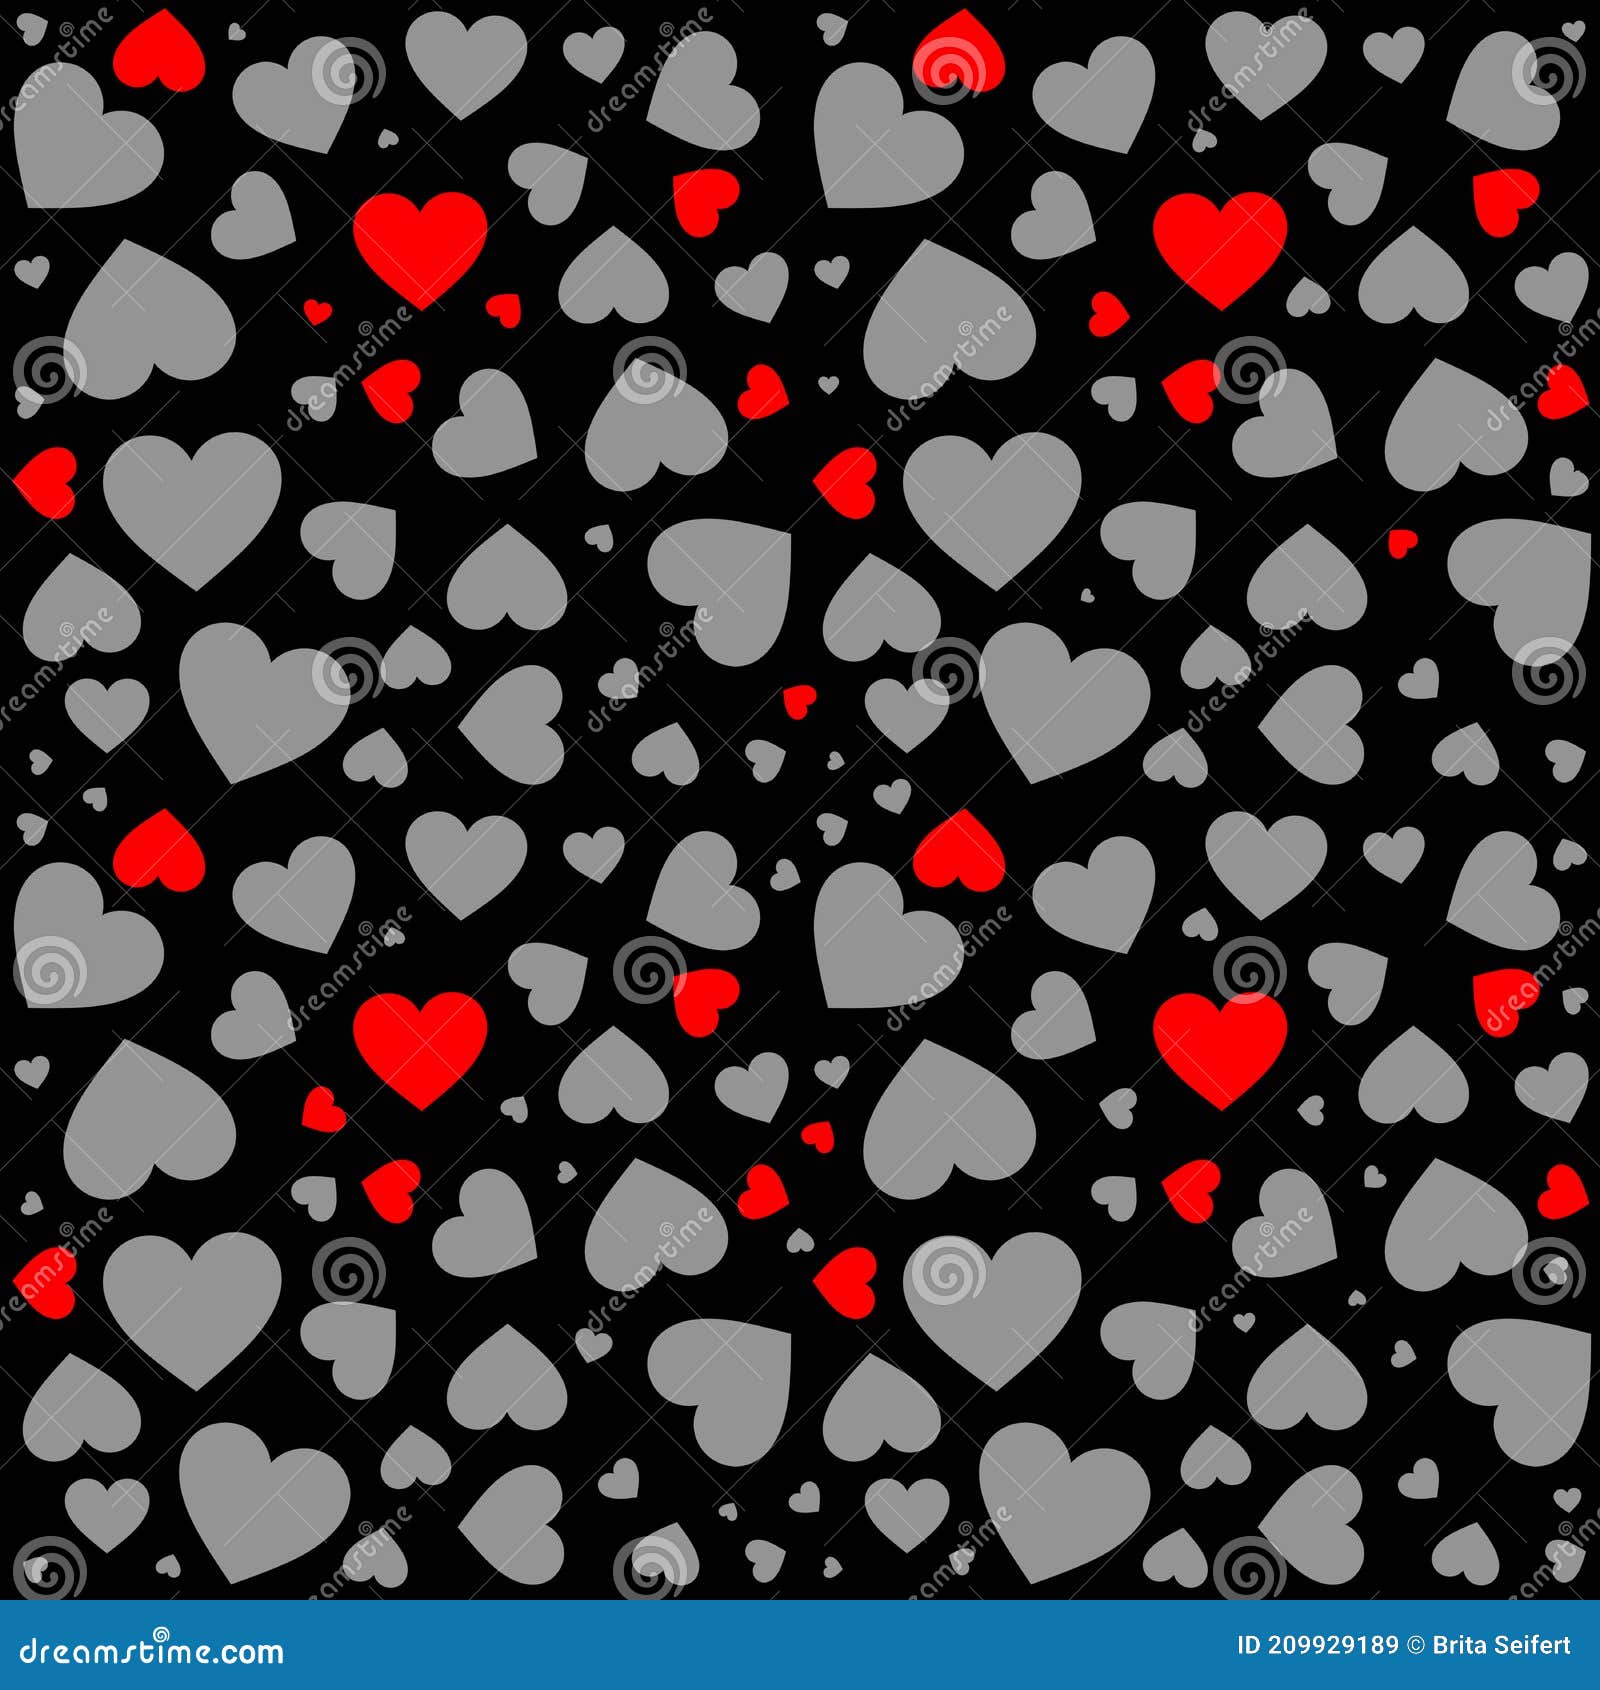 Simple Red Heart Background